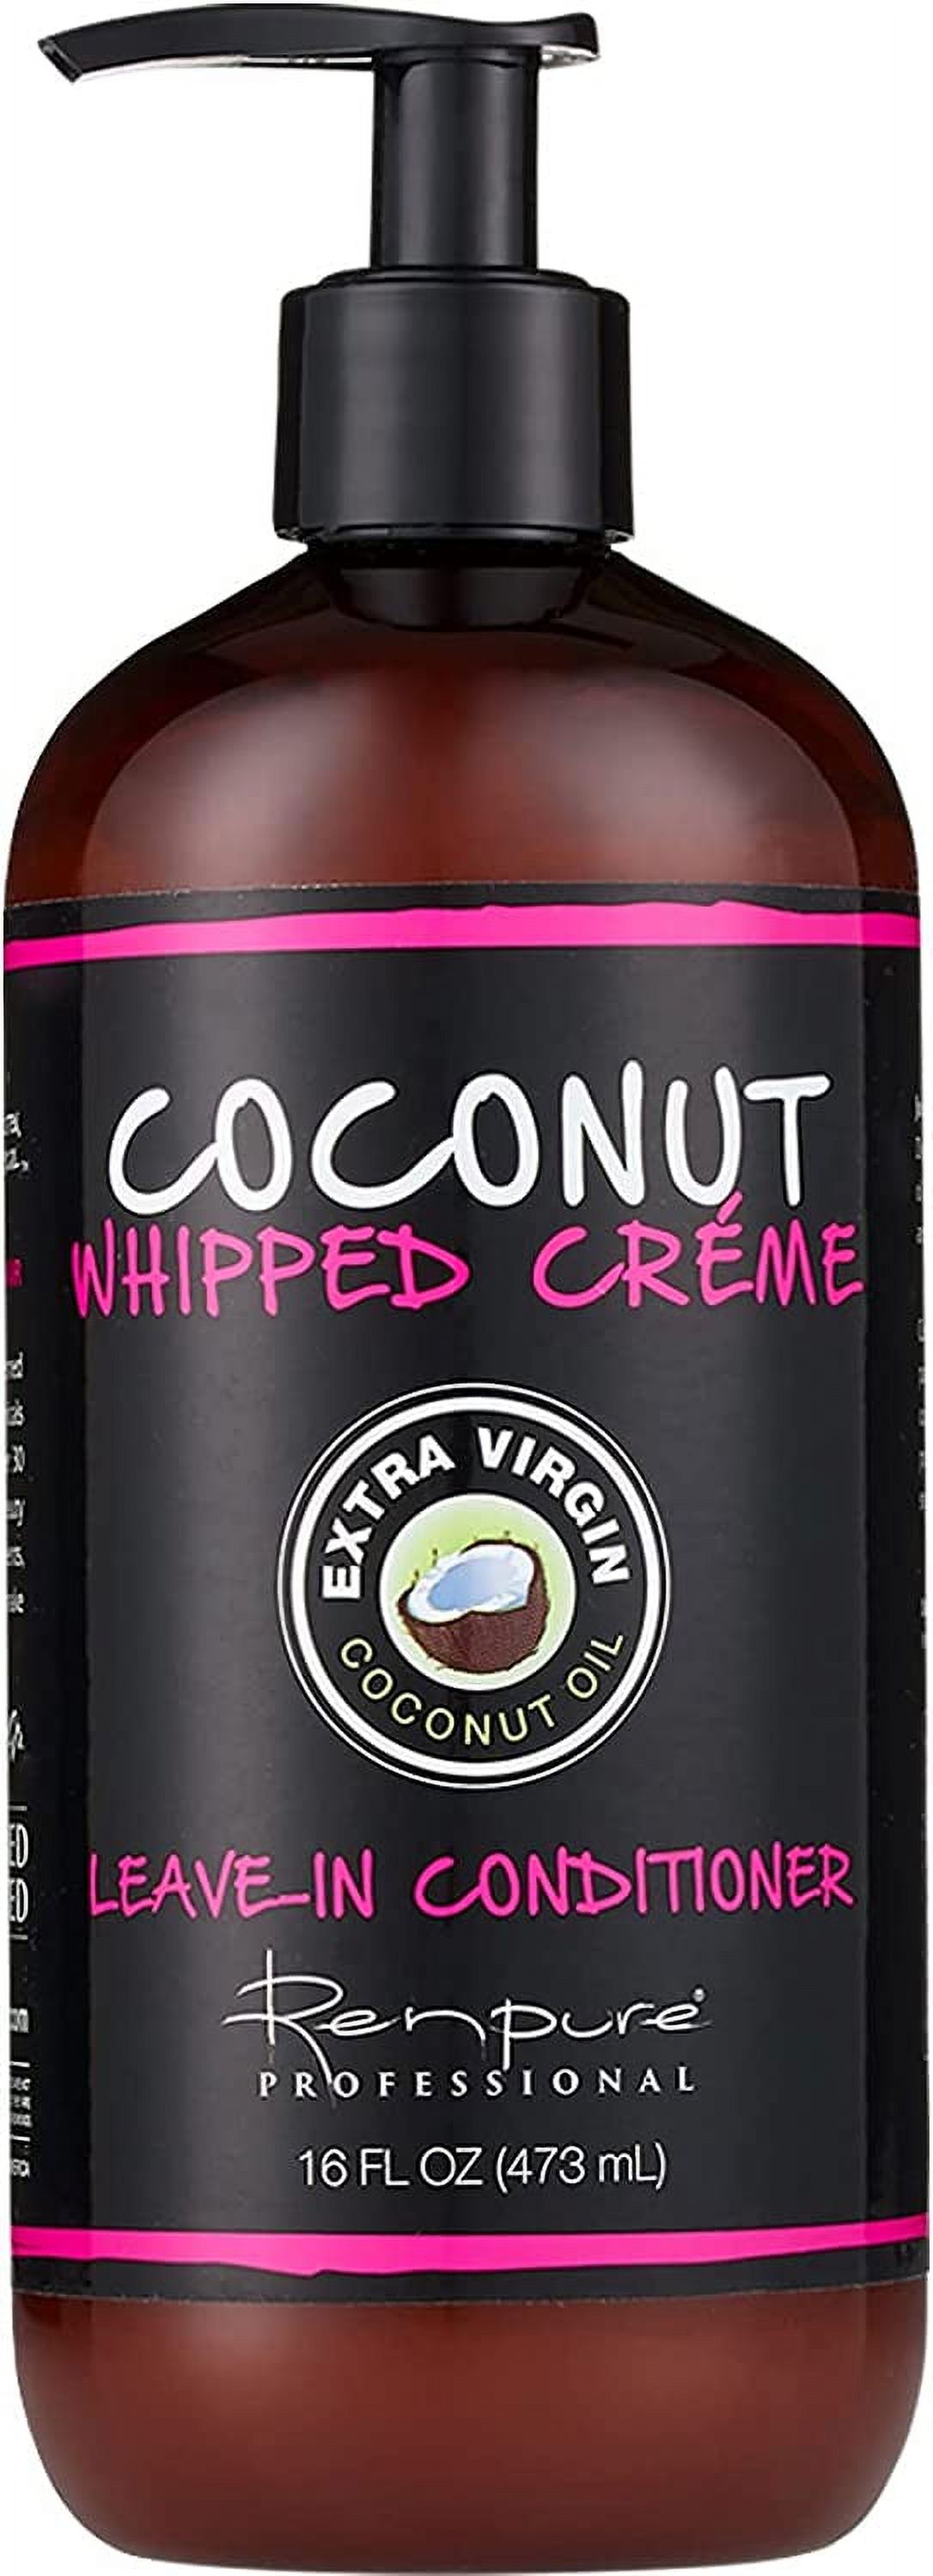 Renpure Coconut Whipped Crème 16 Fl. Oz. Leave-In Conditioner - image 2 of 2